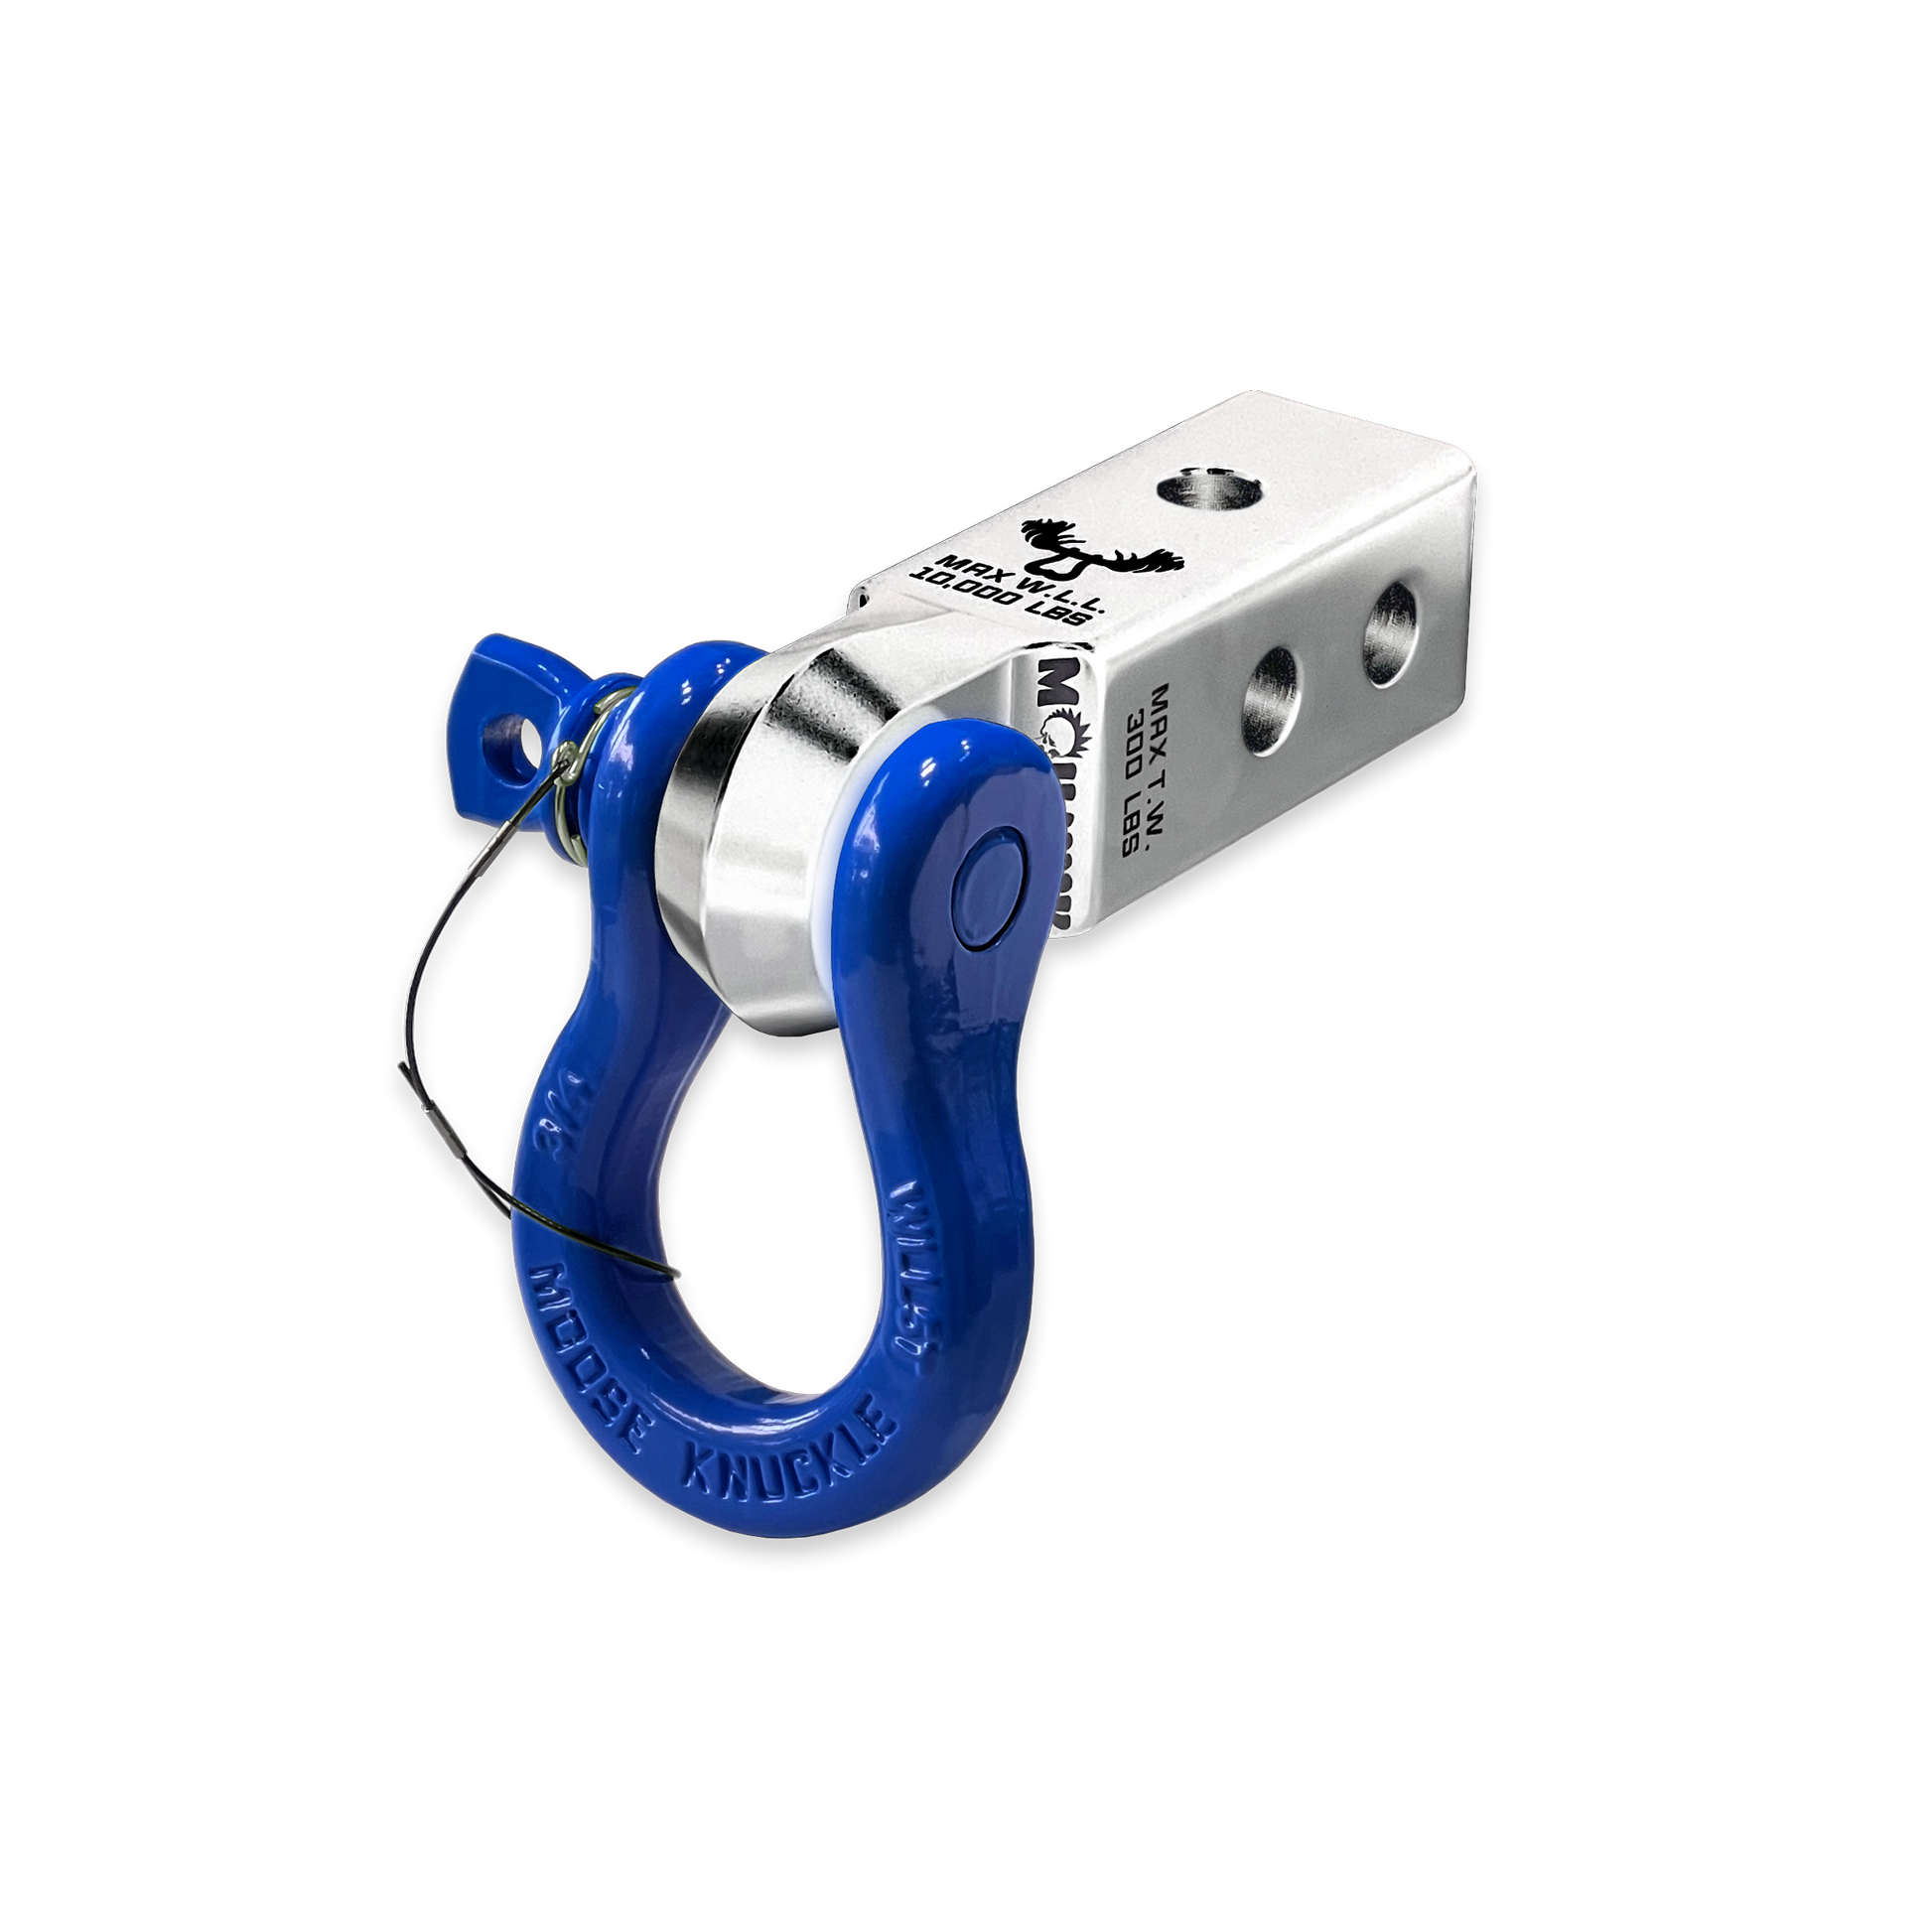 B'oh 3/4 Pin Shackle & 2.0 Receiver (Atomic Silver and Blue Balls Combo)